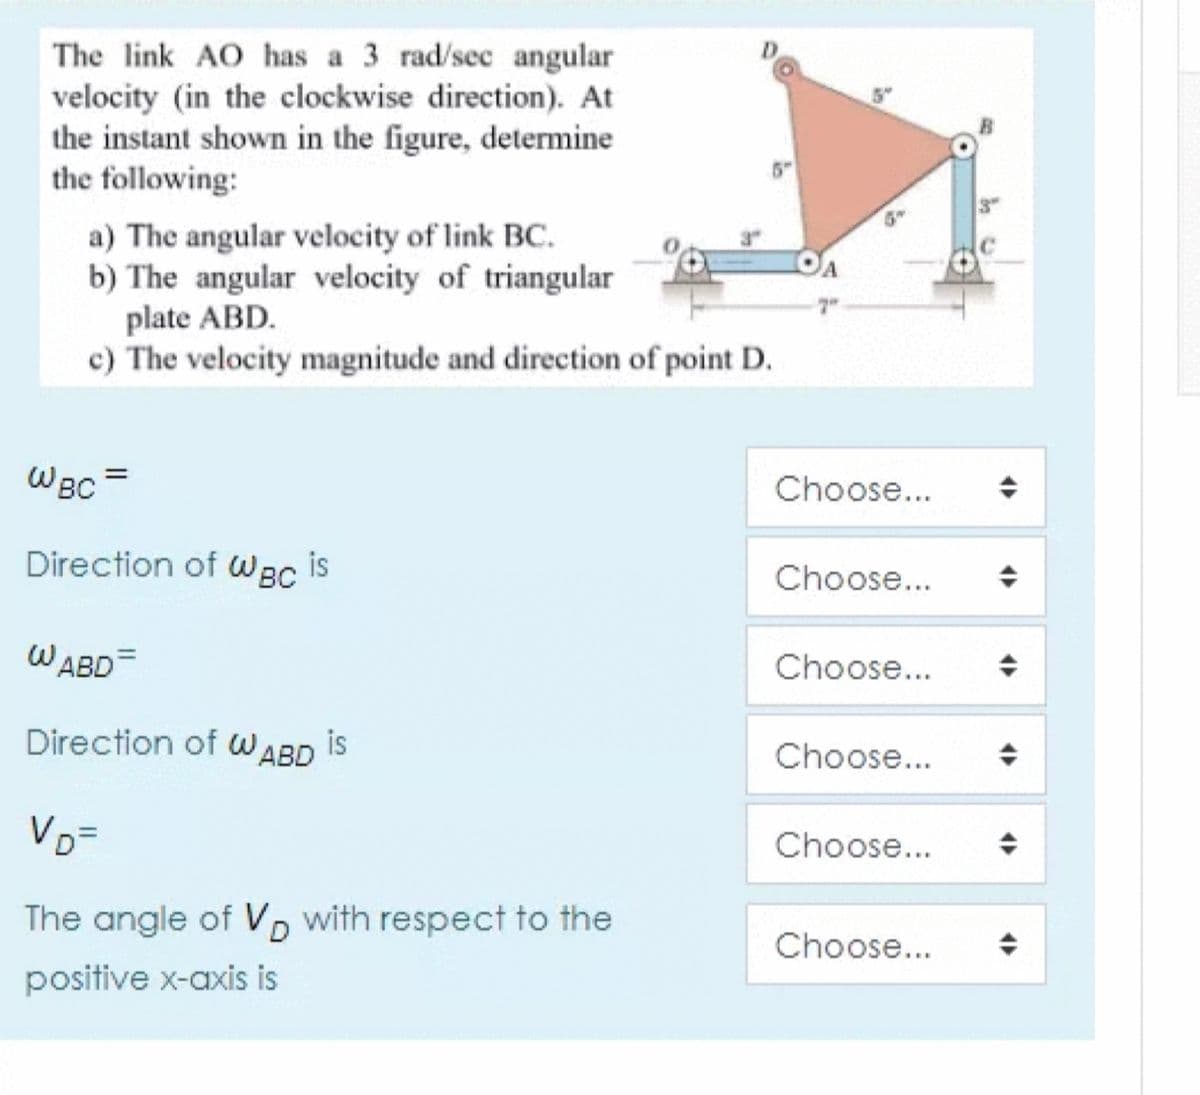 The link AO has a 3 rad/sec angular
velocity (in the clockwise direction). At
the instant shown in the figure, determine
the following:
5"
a) The angular velocity of link BC.
b) The angular velocity of triangular
plate ABD.
c) The velocity magnitude and direction of point D.
7"
WBC
Choose...
Direction of
WBC
is
Choose...
WABD=
Choose...
Direction of WABD is
Choose...
VD=
Choose...
The angle of VD with respect to the
Choose...
positive x-axis is
